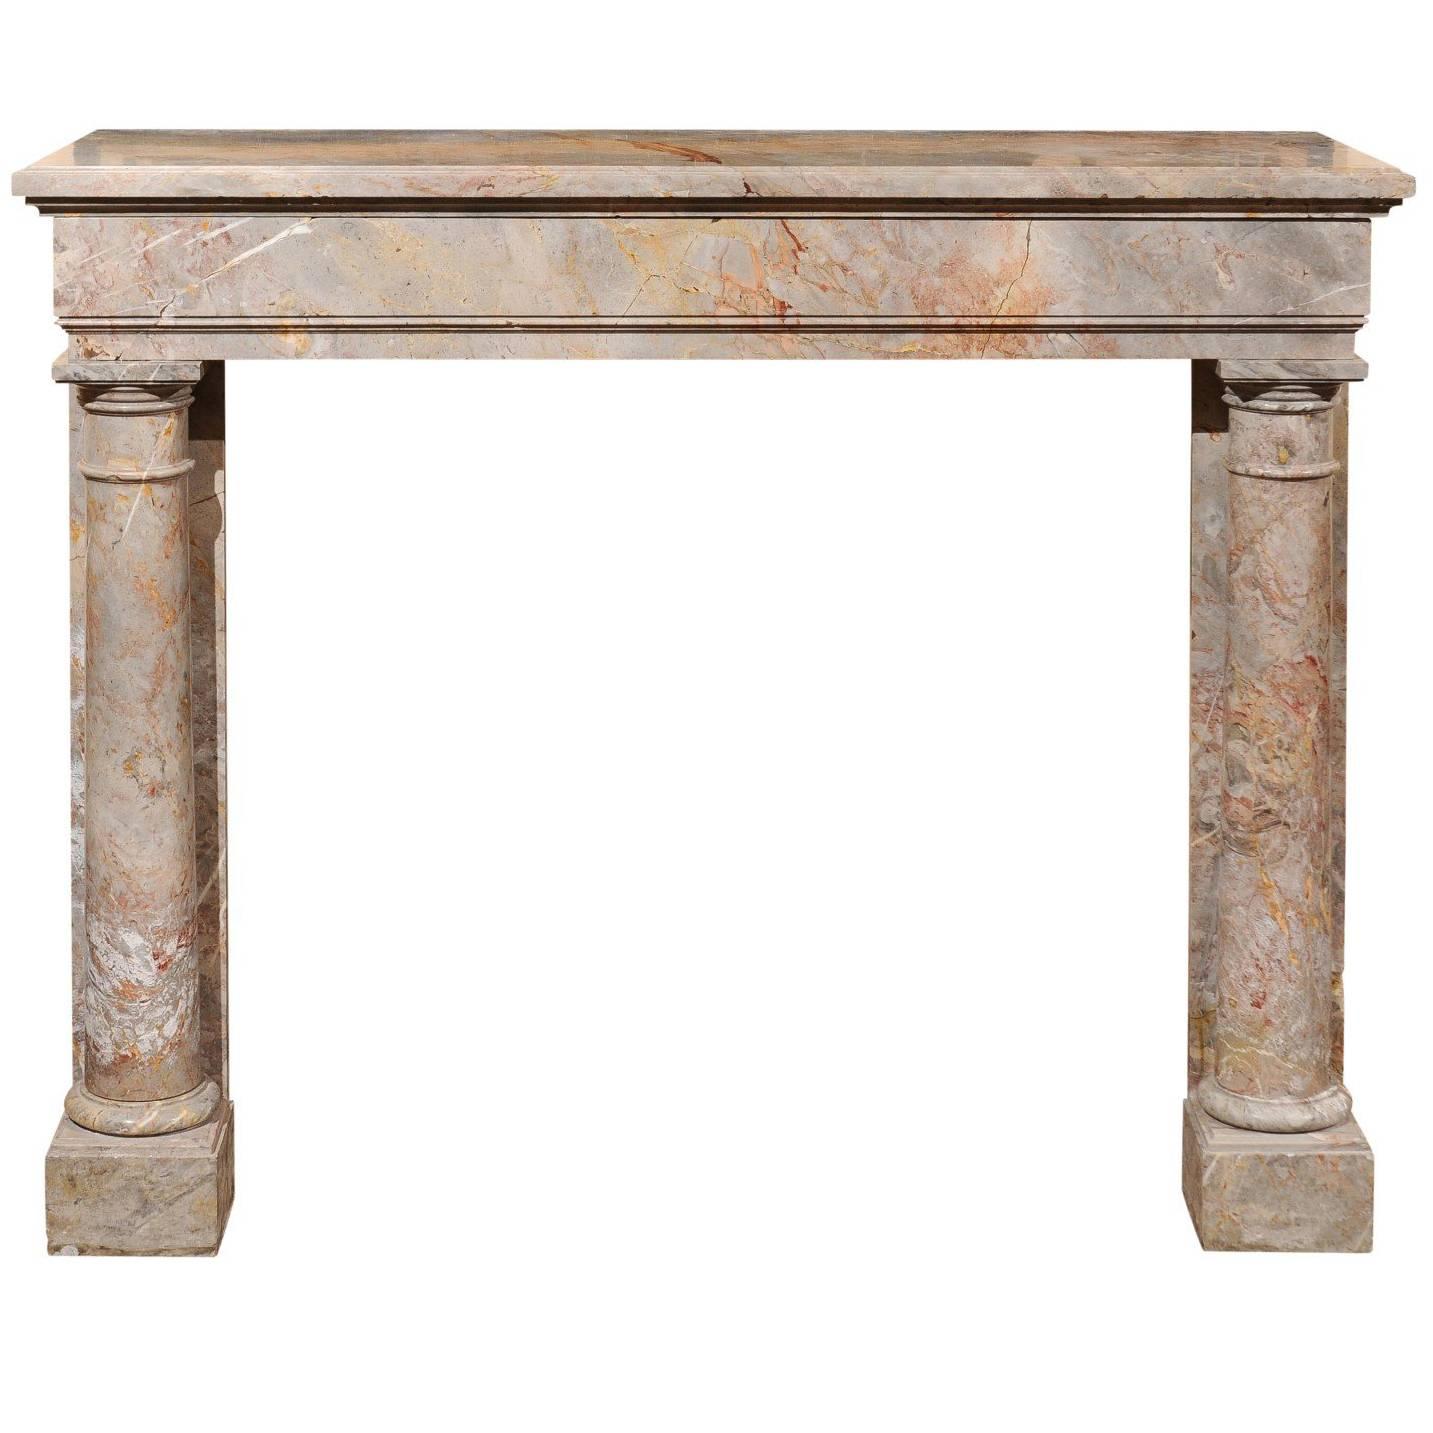 19th Century French Neoclassical Style Marble Mantel with Columns